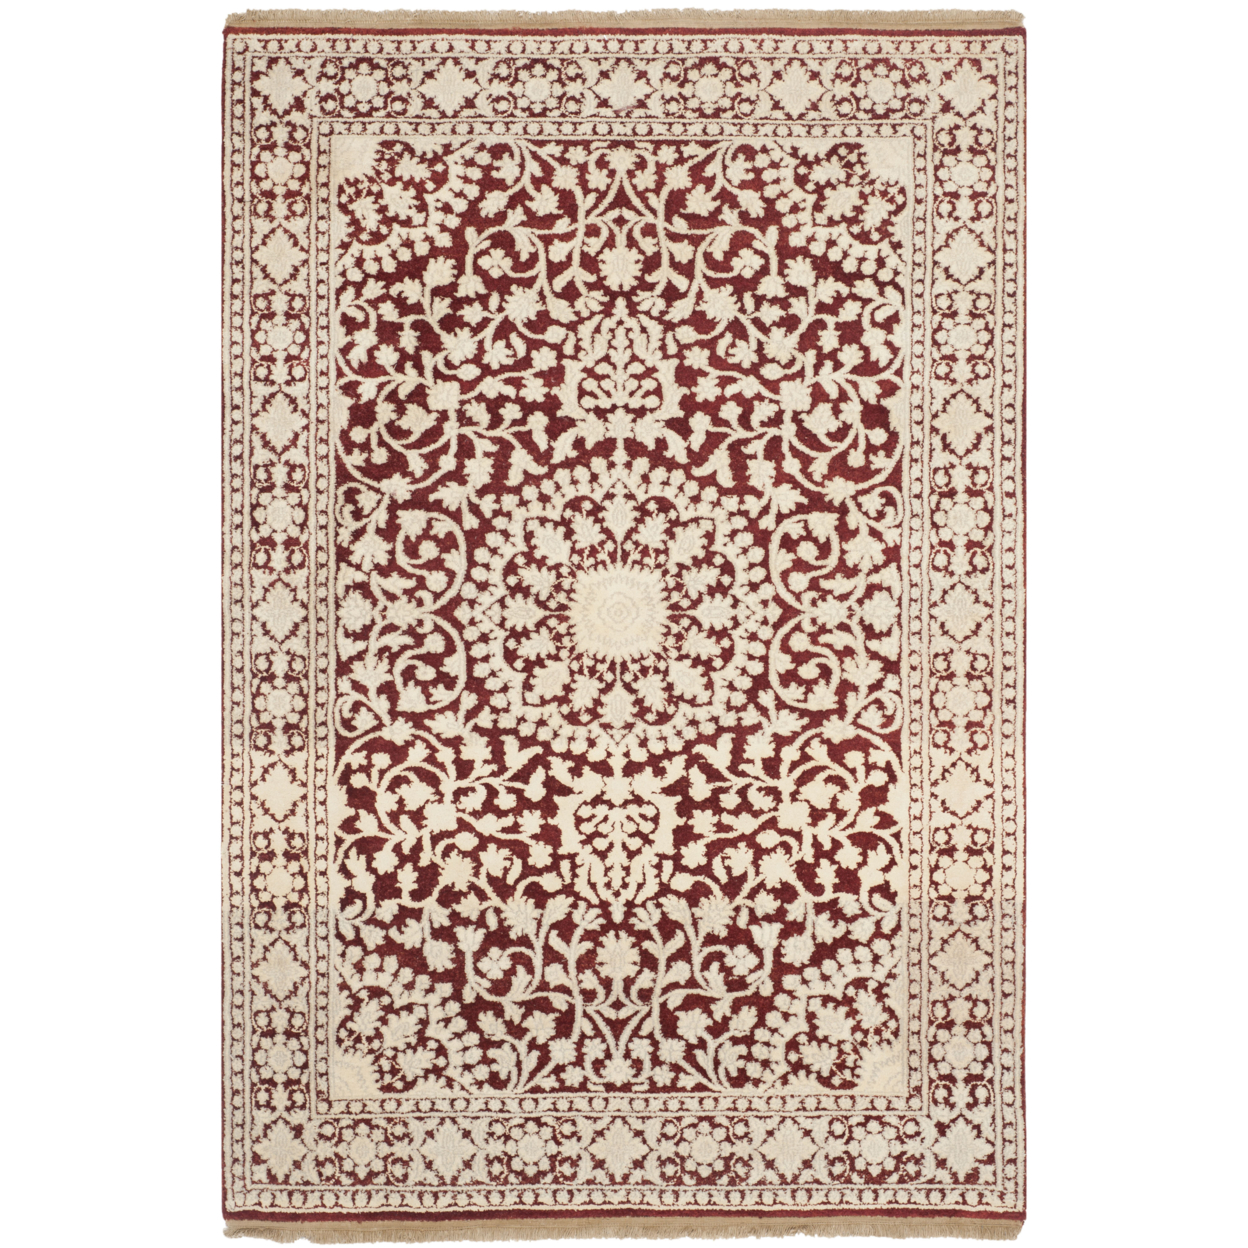 Safavieh GR601C Ganges River Red / Ivory - Charcoal / Ivory, 2' X 3' Accent